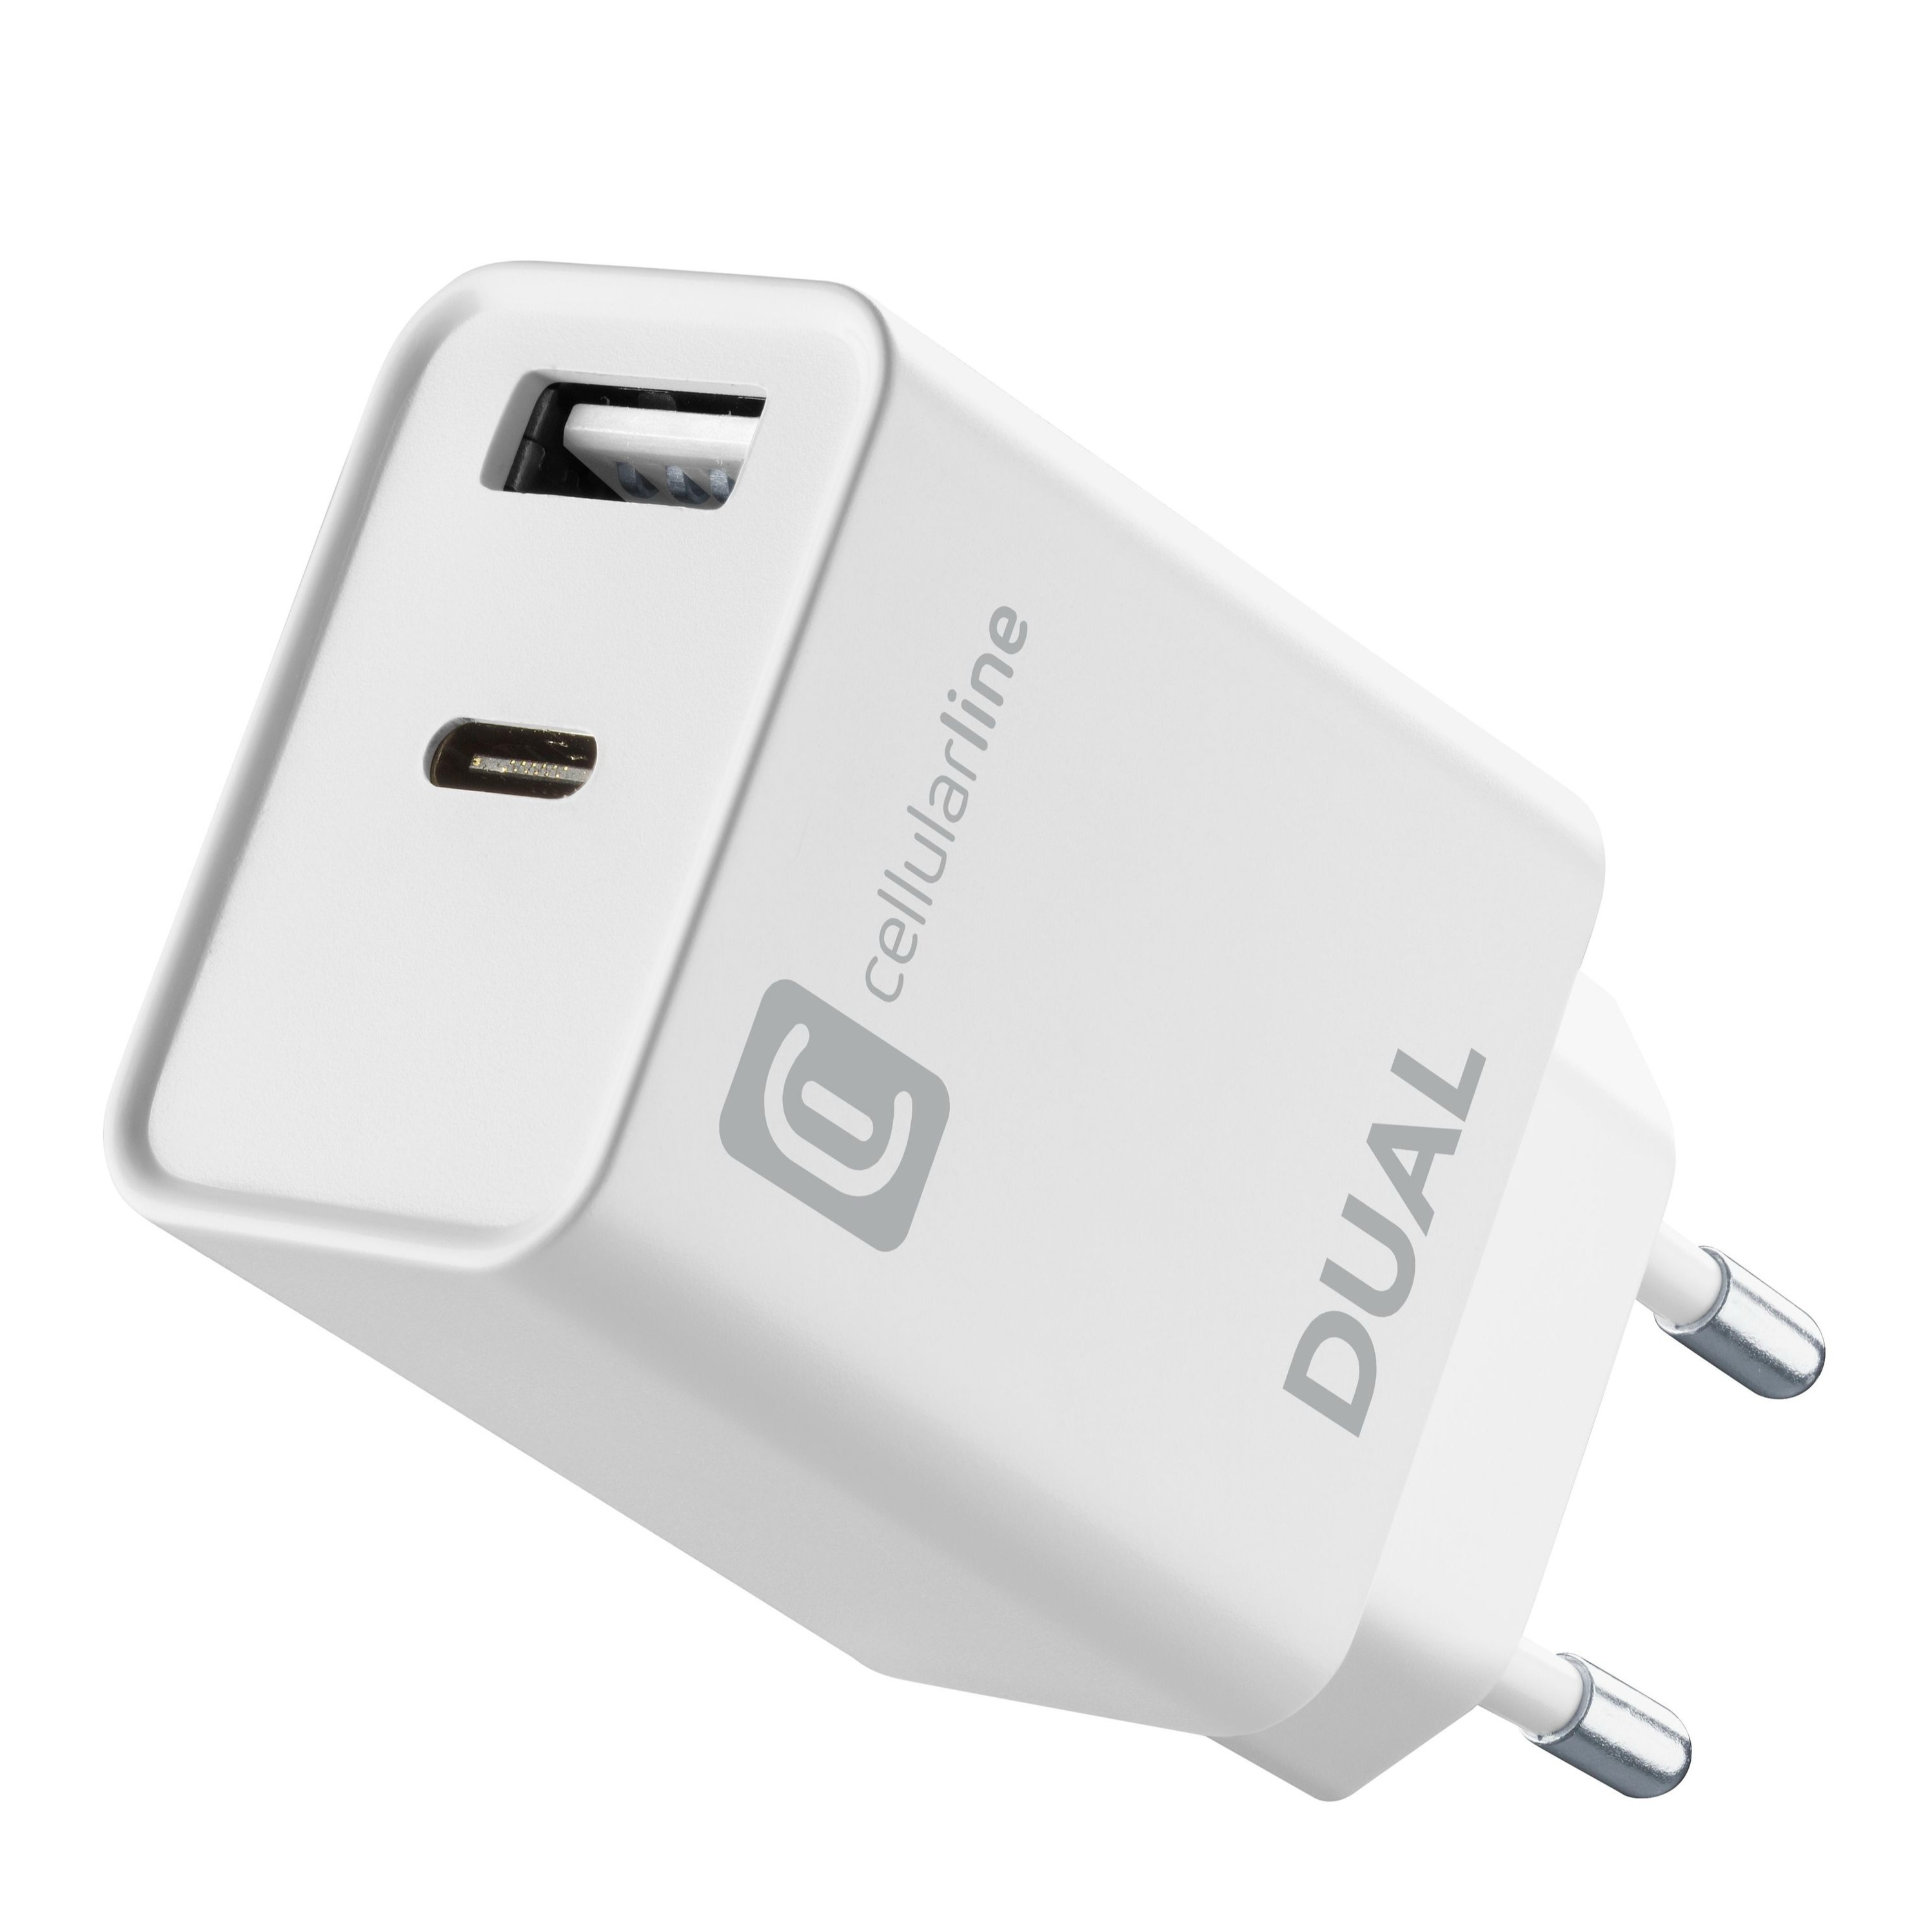 Image of Cellularline - (20W) USB / USB C Fast Charge Ladegerät Power Delivery Netzteil (ACHIPHUSB2PD20WW) - Weiss bei Apfelkiste.ch